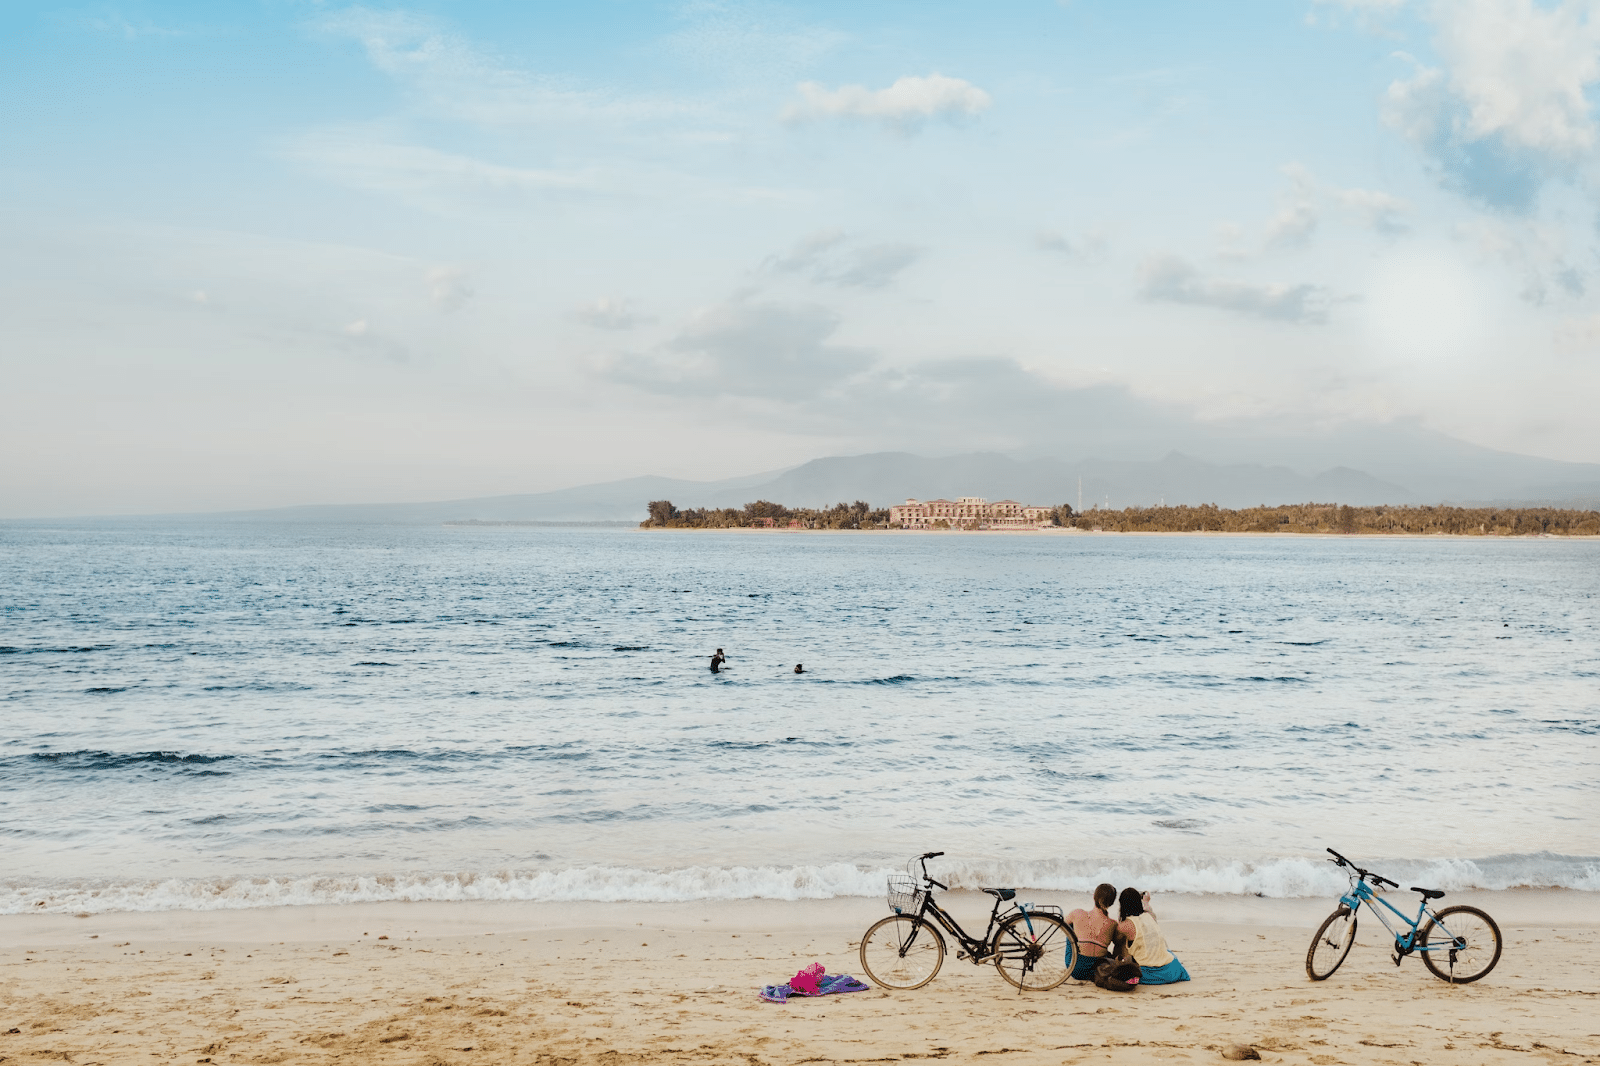 A beach of Gili Meno, The beach visitors are on their way by bike.